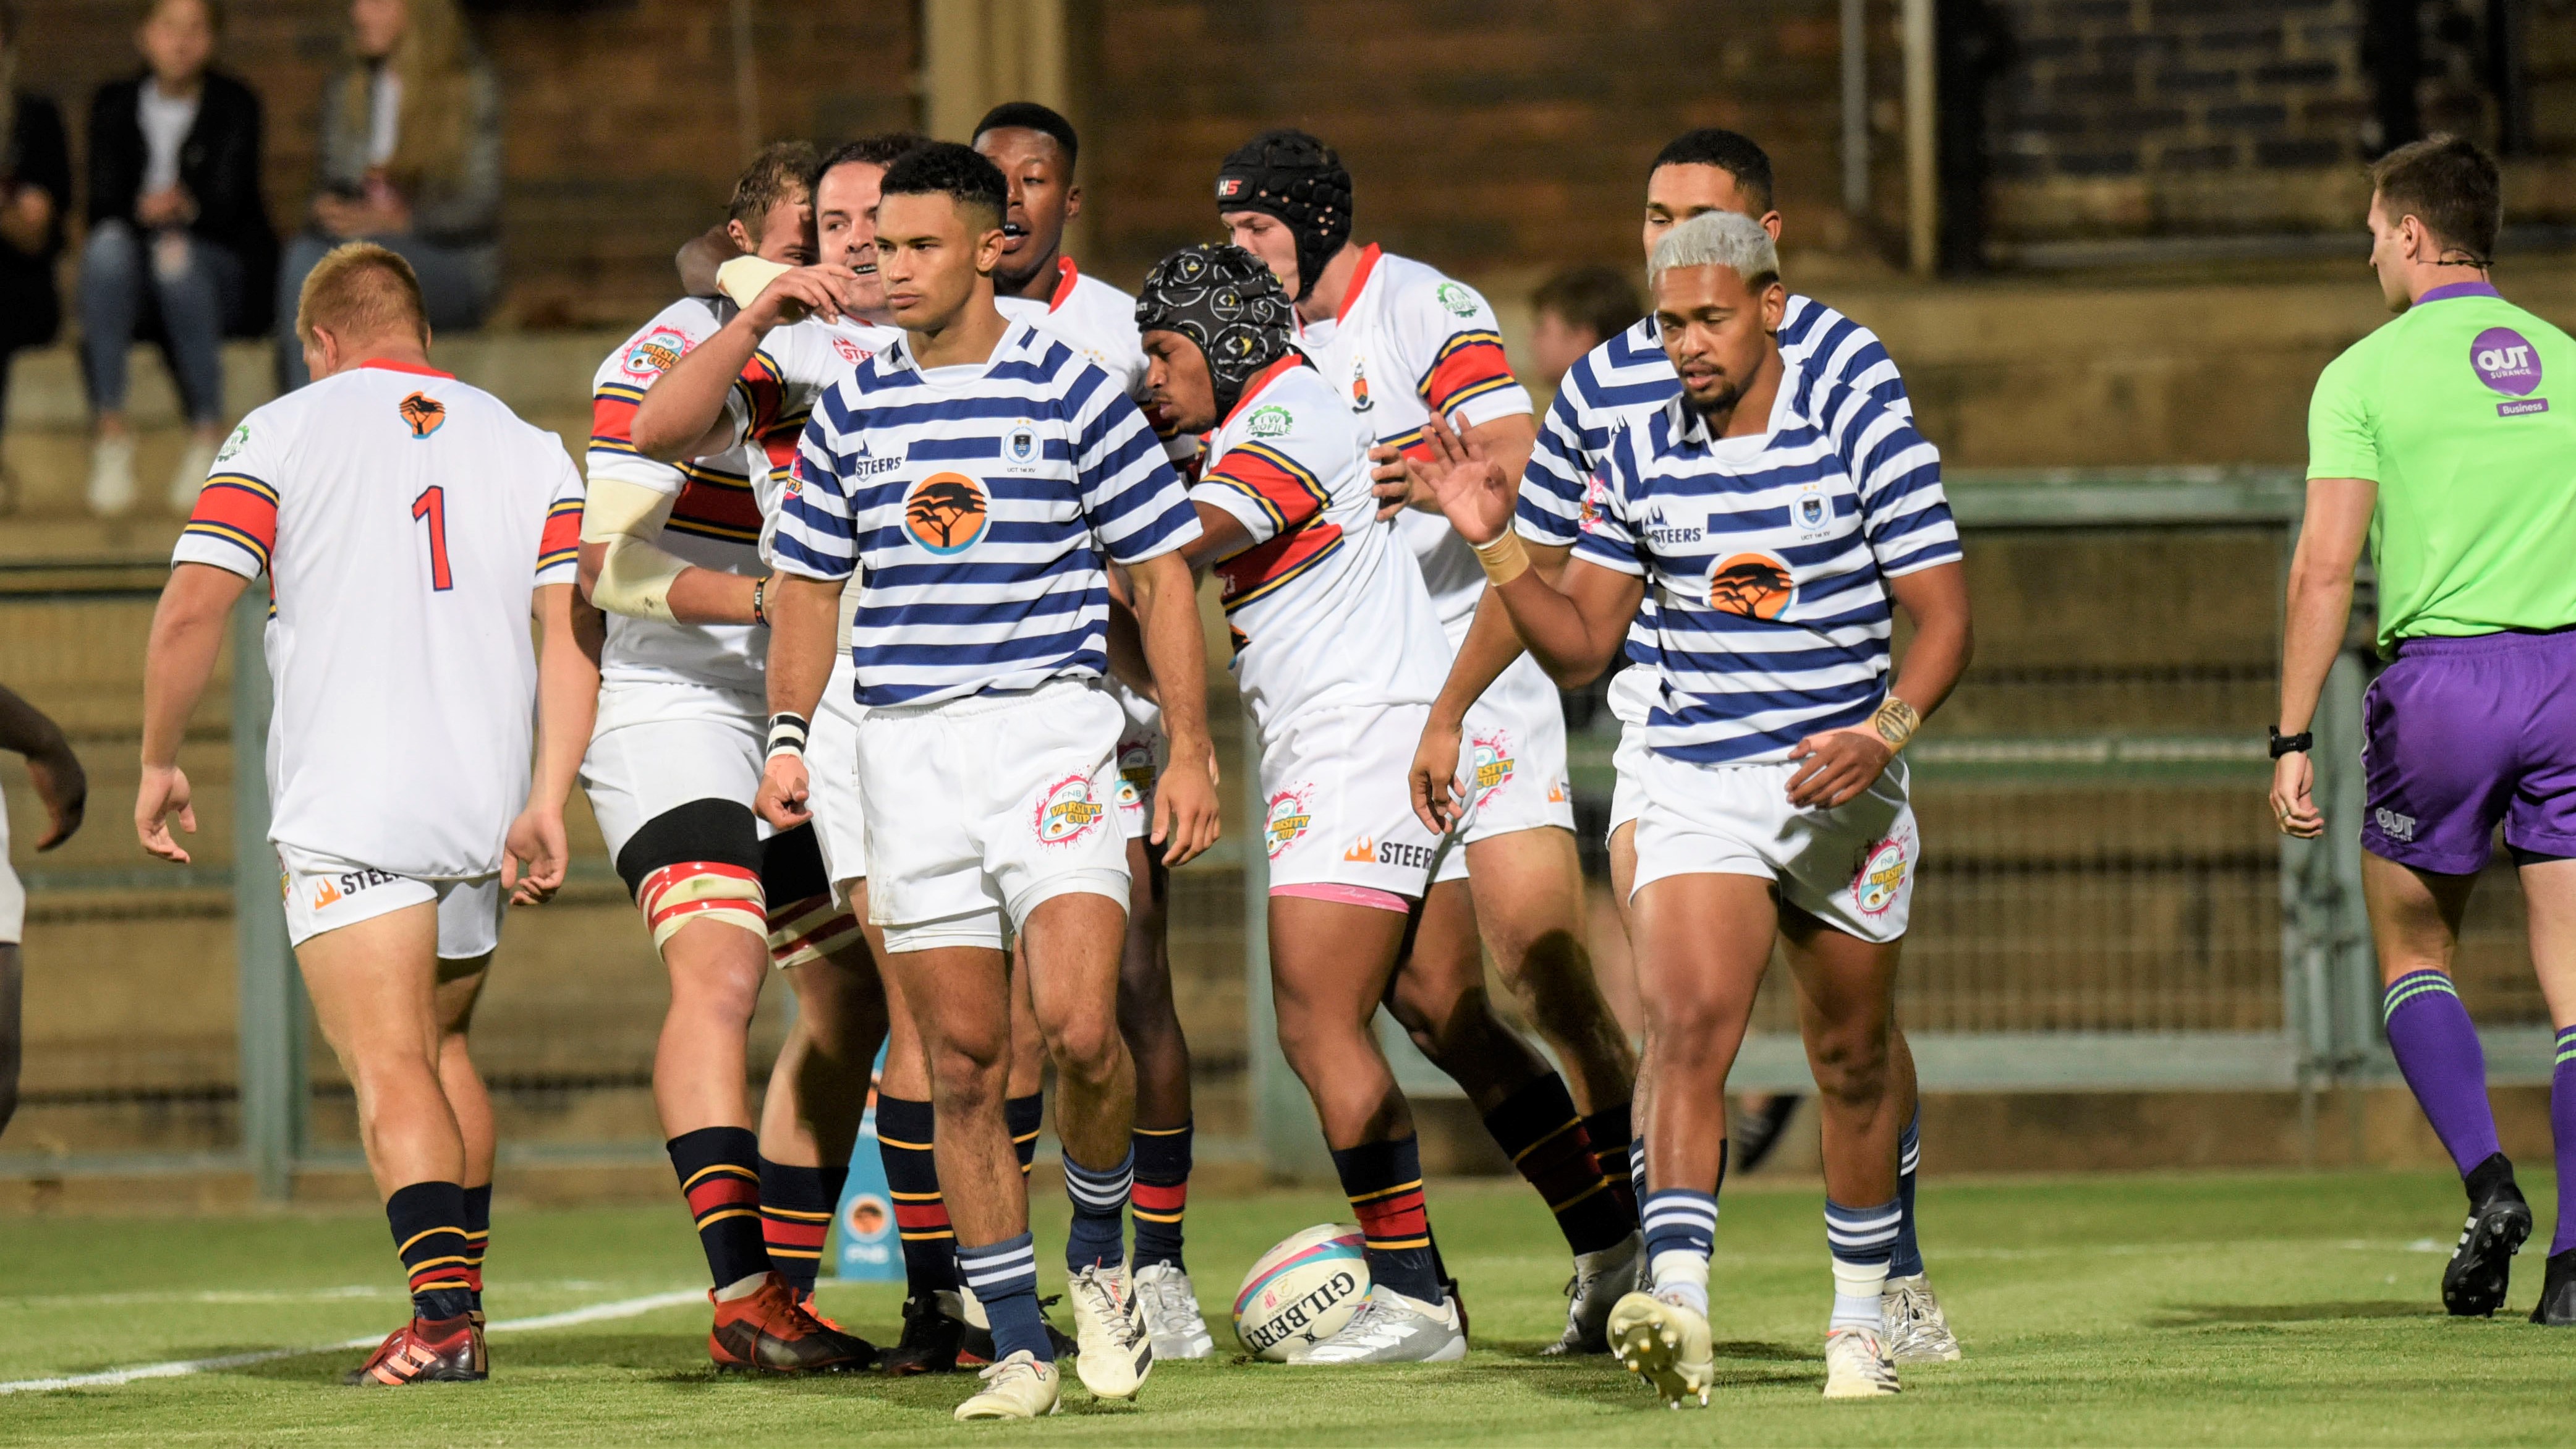 VARSITY CUP 2022, Presented by FNB AND PARTNERS, at UP TUKS MAIN FIELD, Pretoria. MONDAY 28 February 2022 FNB UP TUKS vs FNB UCT IKEYS Tuks celebrate a fast try by Dian Schoonees, of UP TUKS Catherine Kotze/Varsity